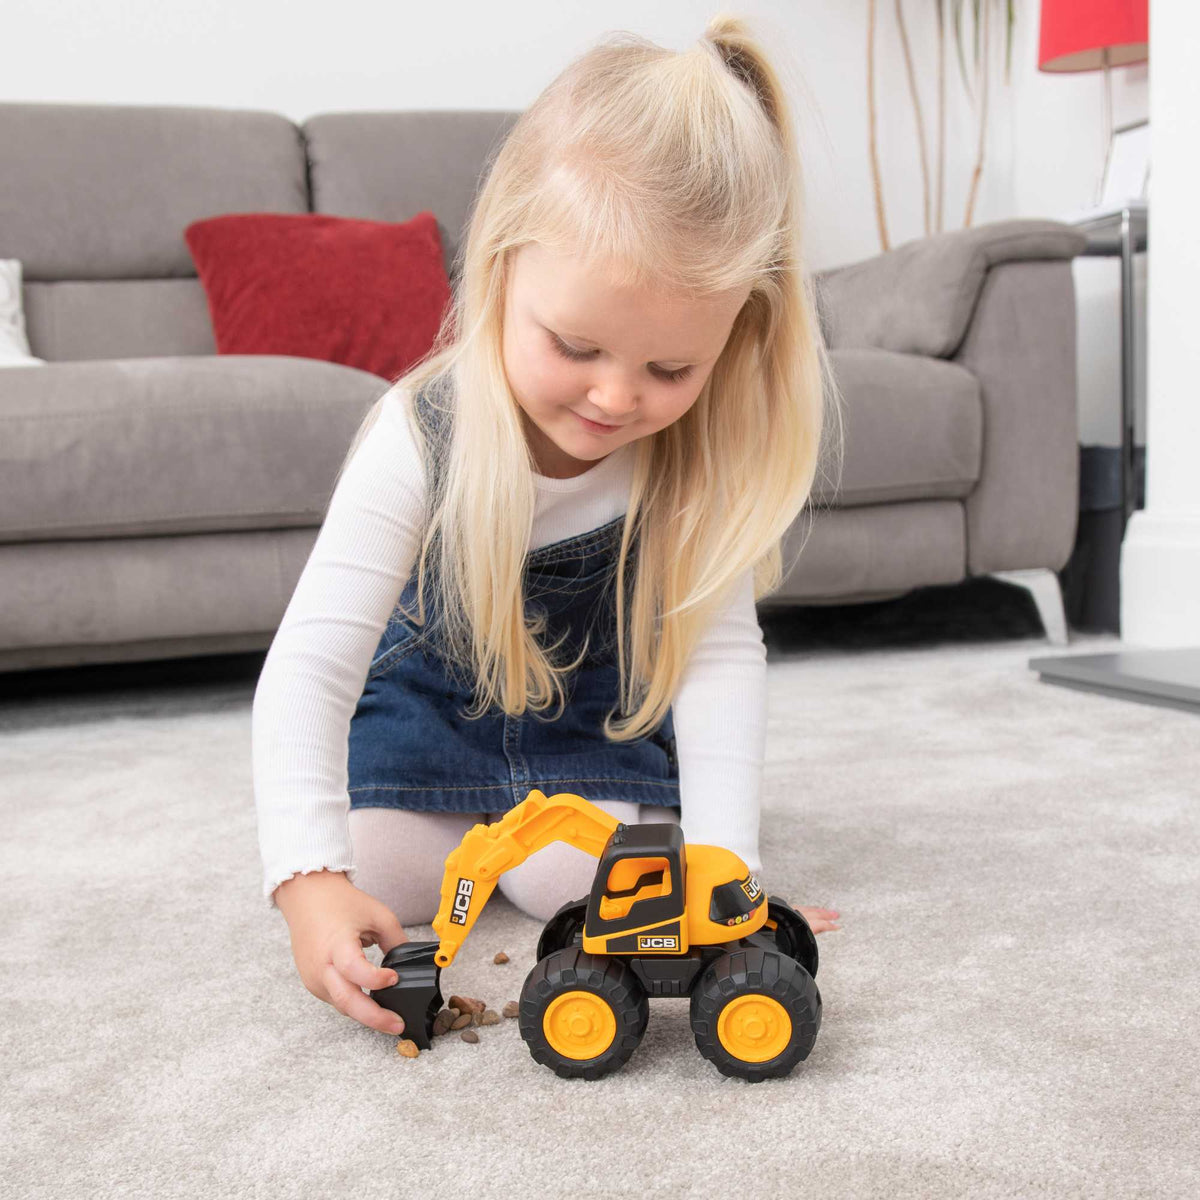 JCB Toys, Construction Toys, Digger Toys, Kids Diggers, Toy Cars, Toy Trucks, Toy Diggers